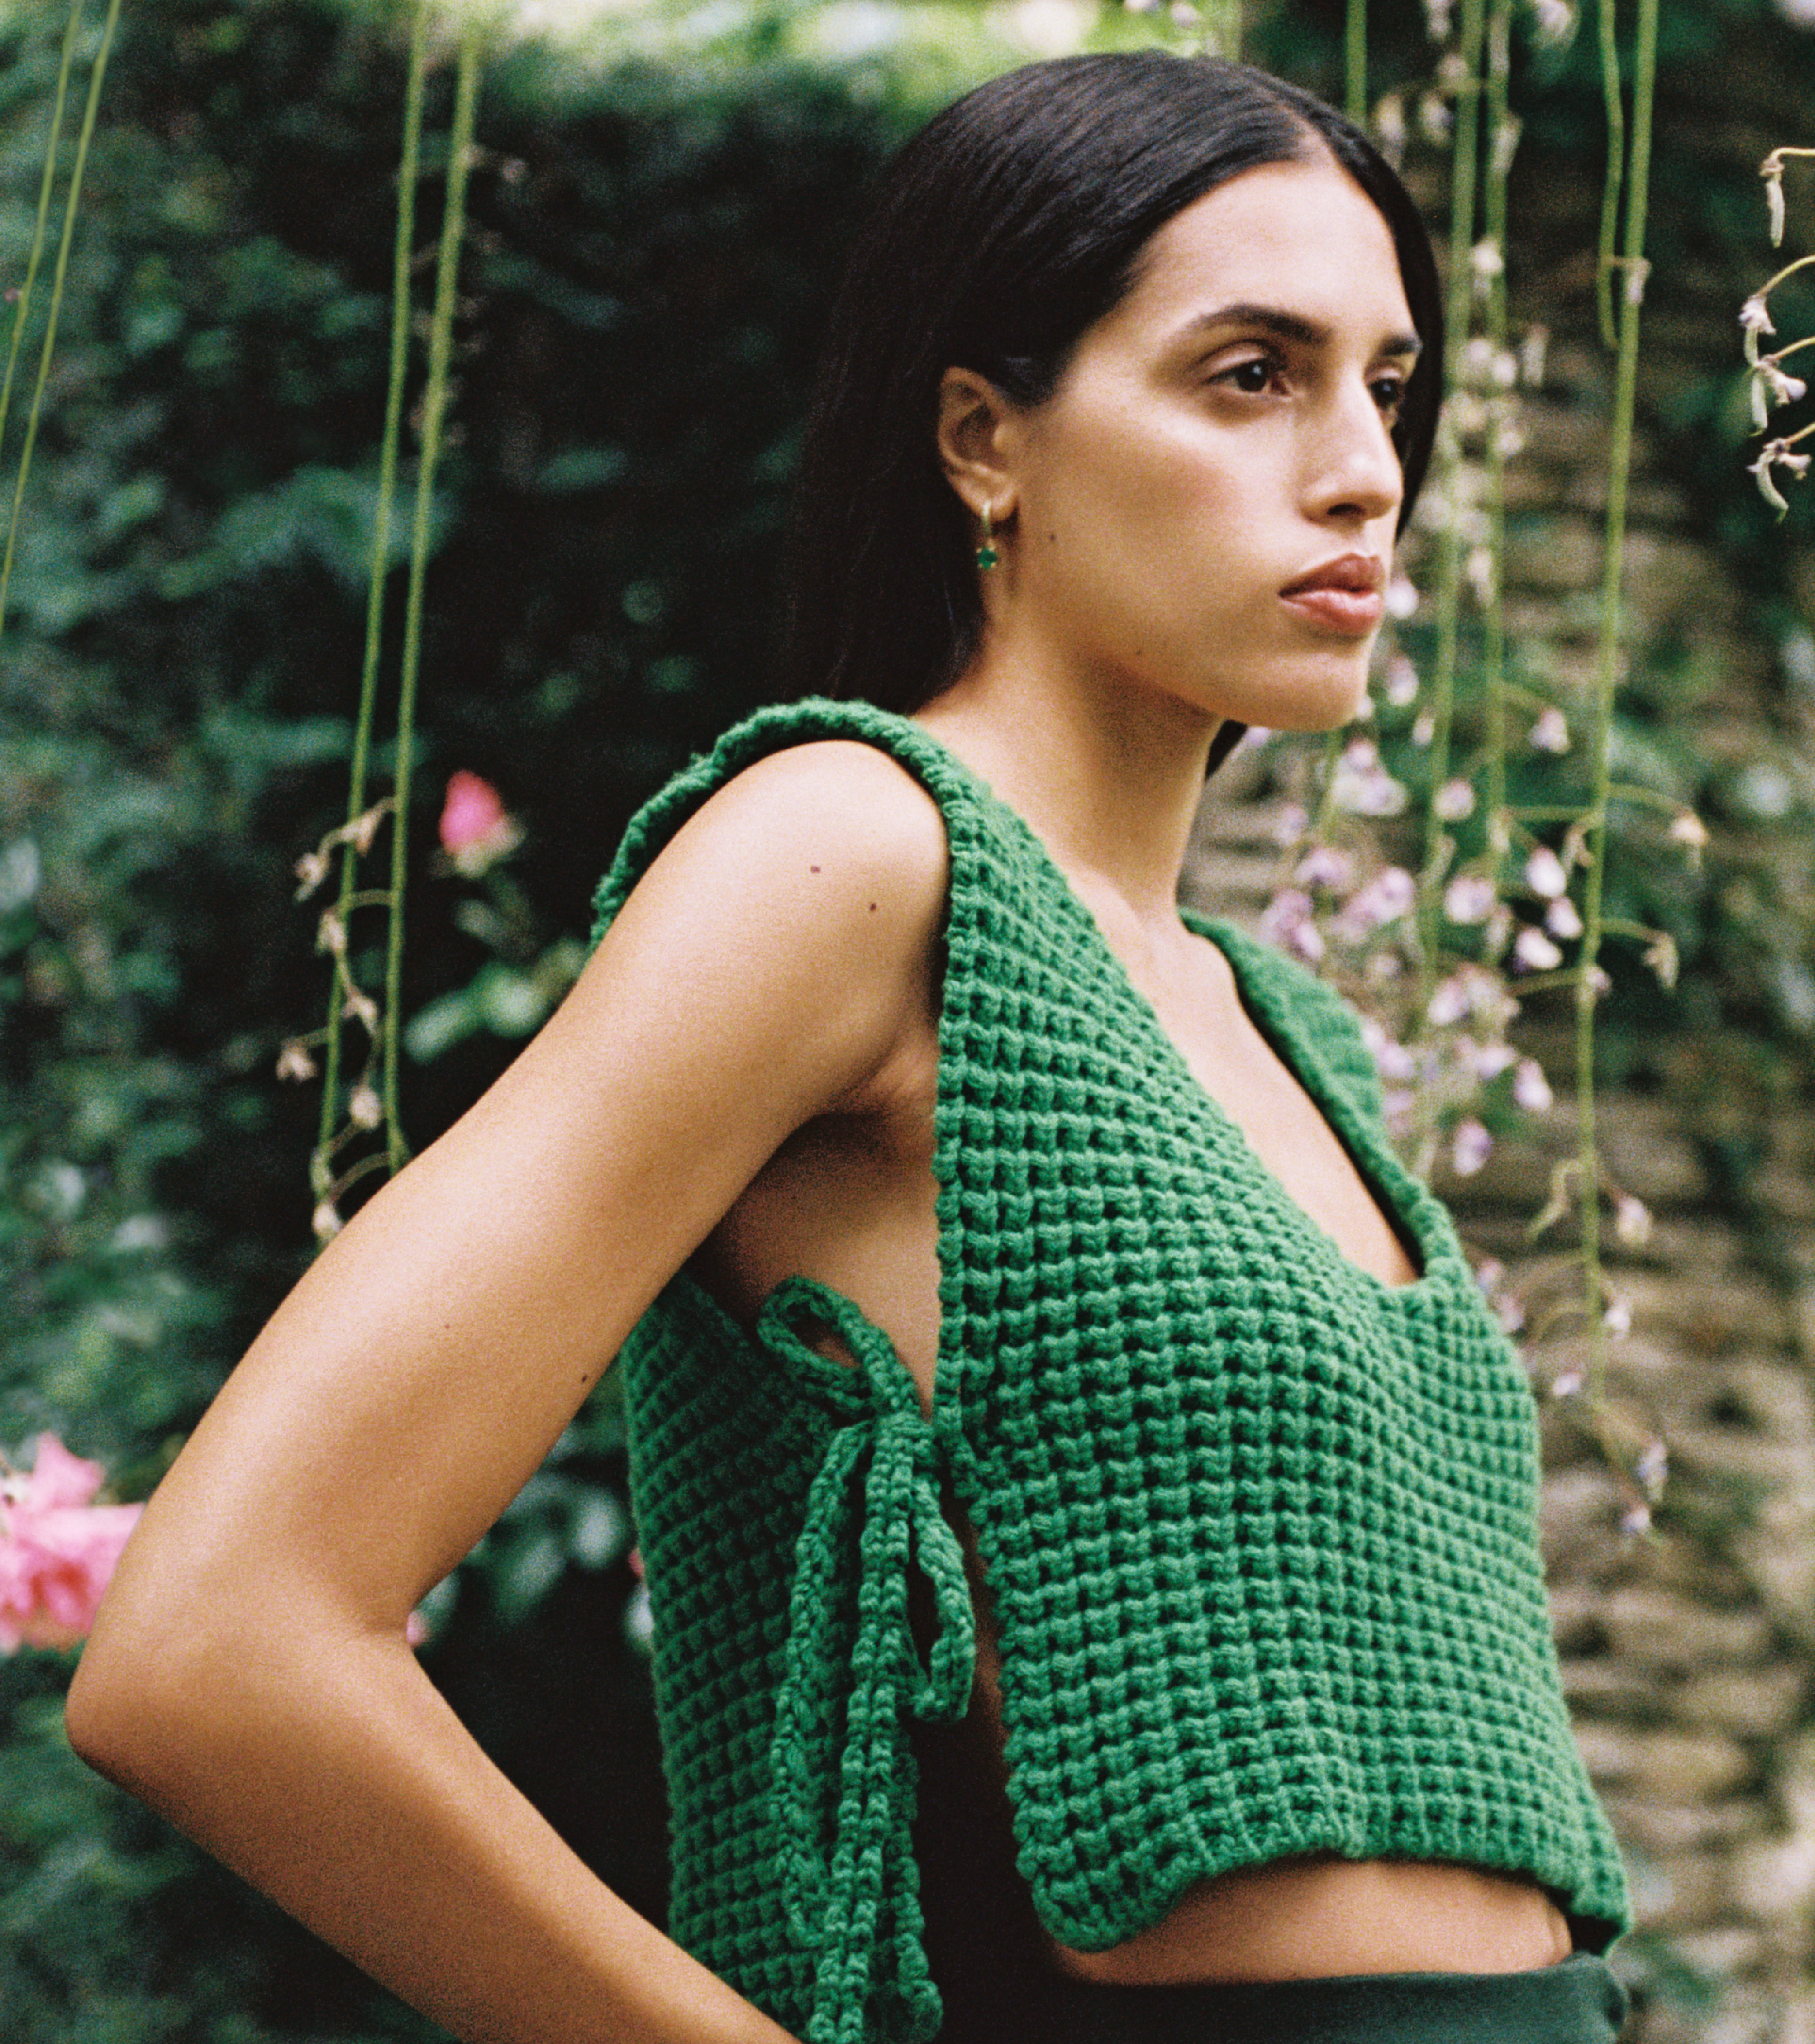 The knitted crop vest